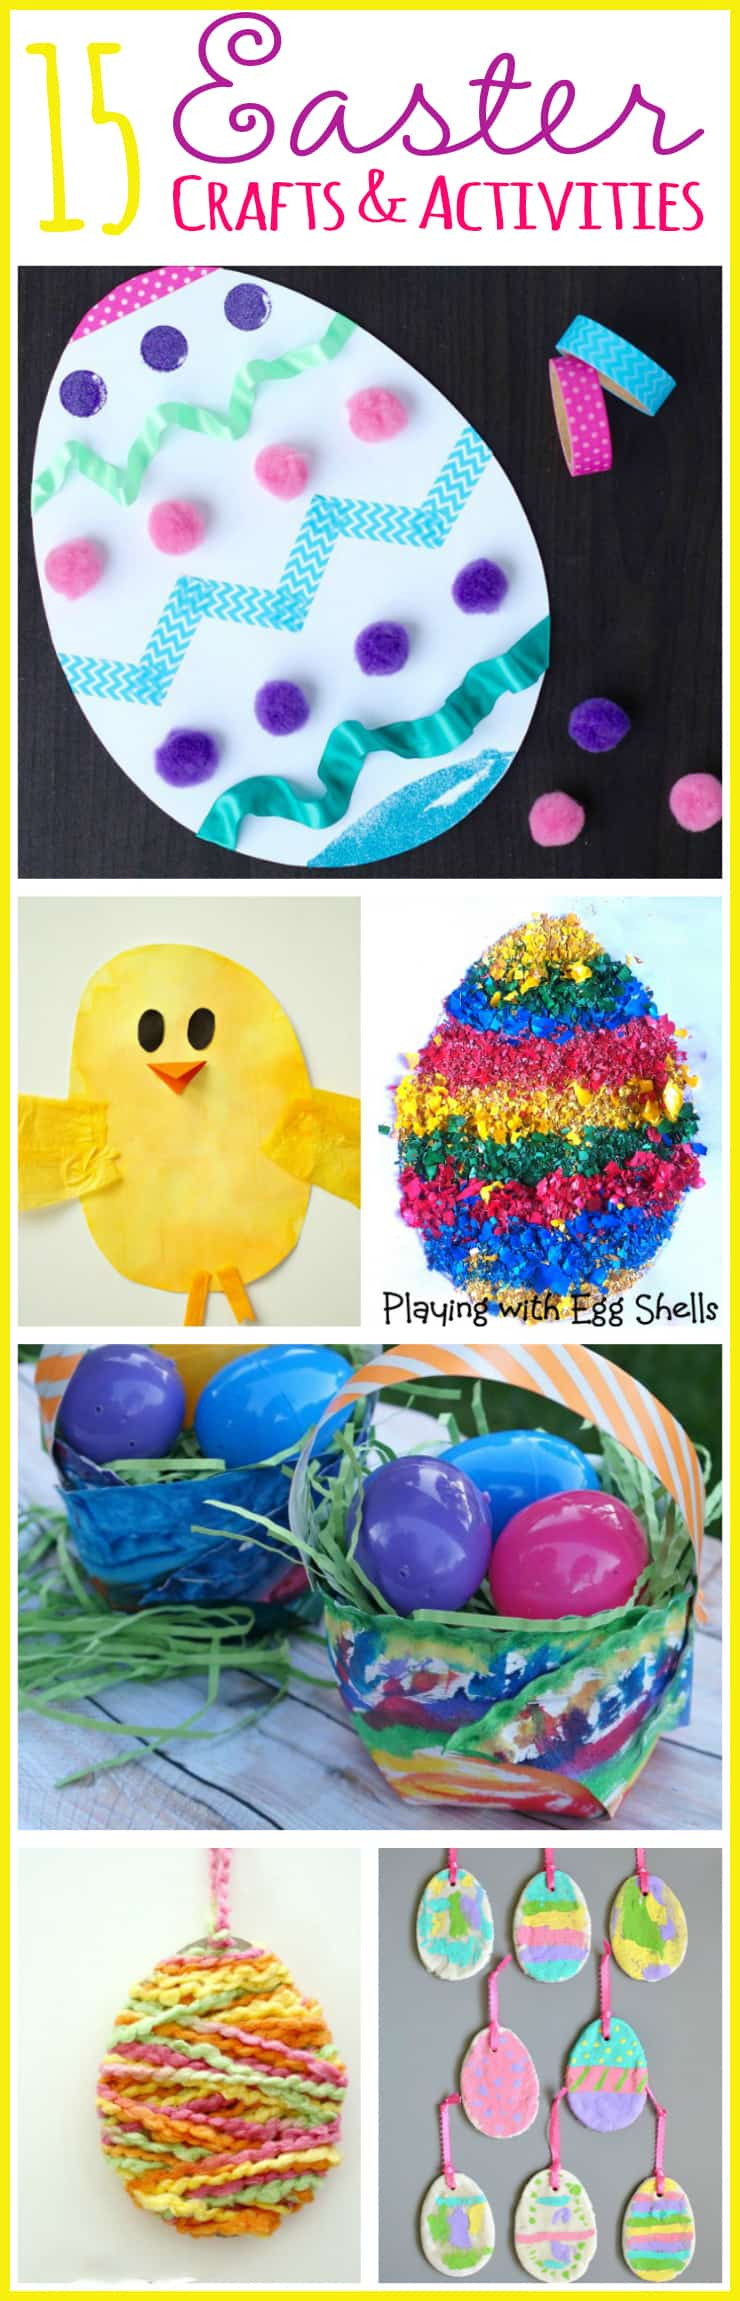 Crafts For Easter
 15 Fun & Easy Easter Crafts & Activities 5 Minutes for Mom